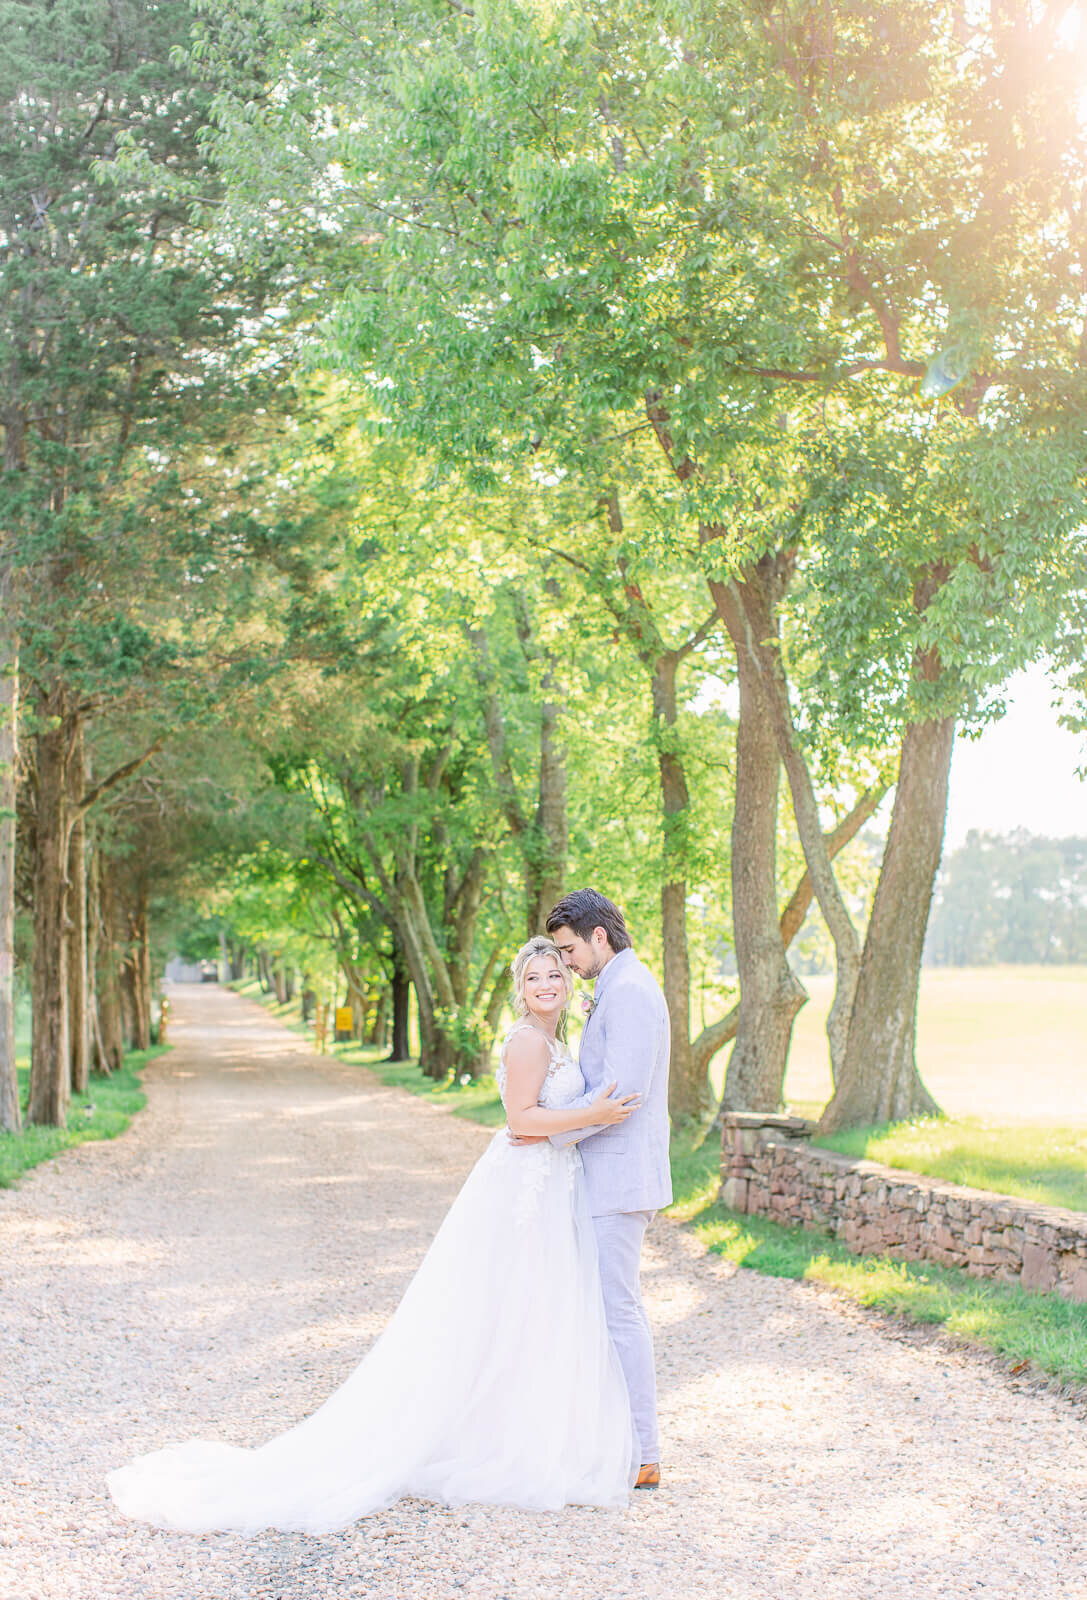 Golden hour Wedding Portraits at Great Marsh Estate. Captured by Bethany Aubre Photography.